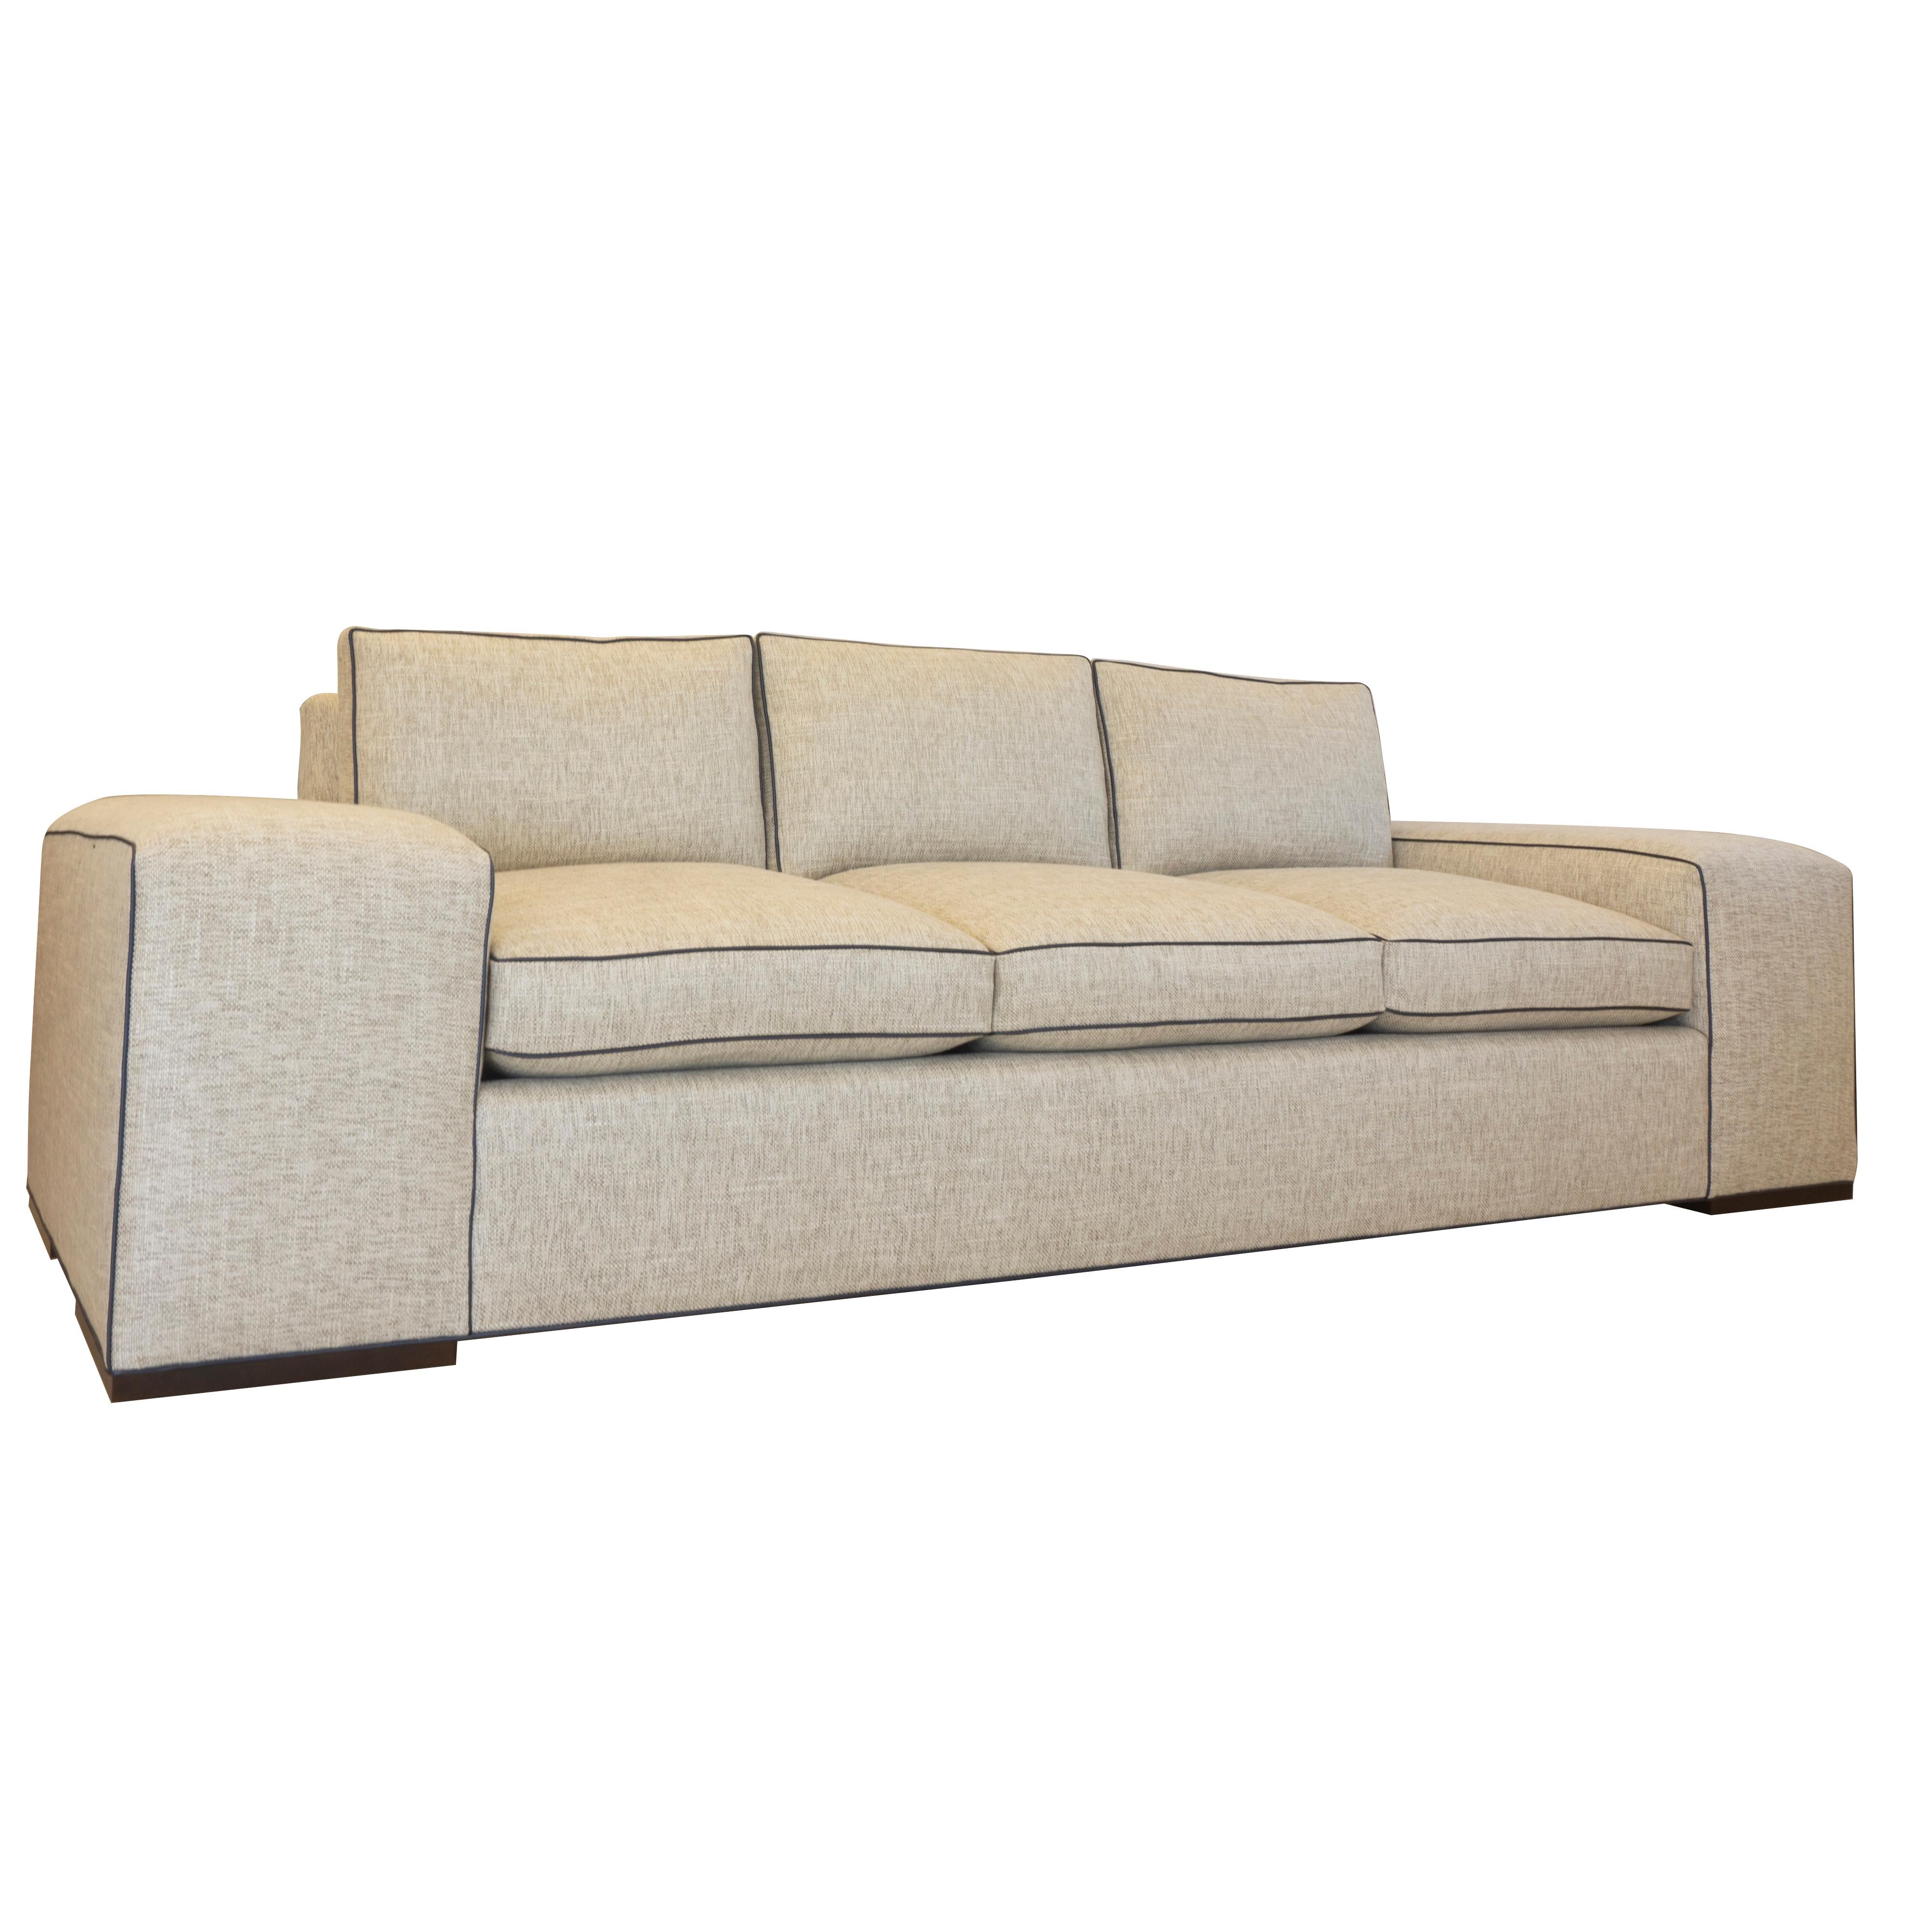 sofa with wide arms